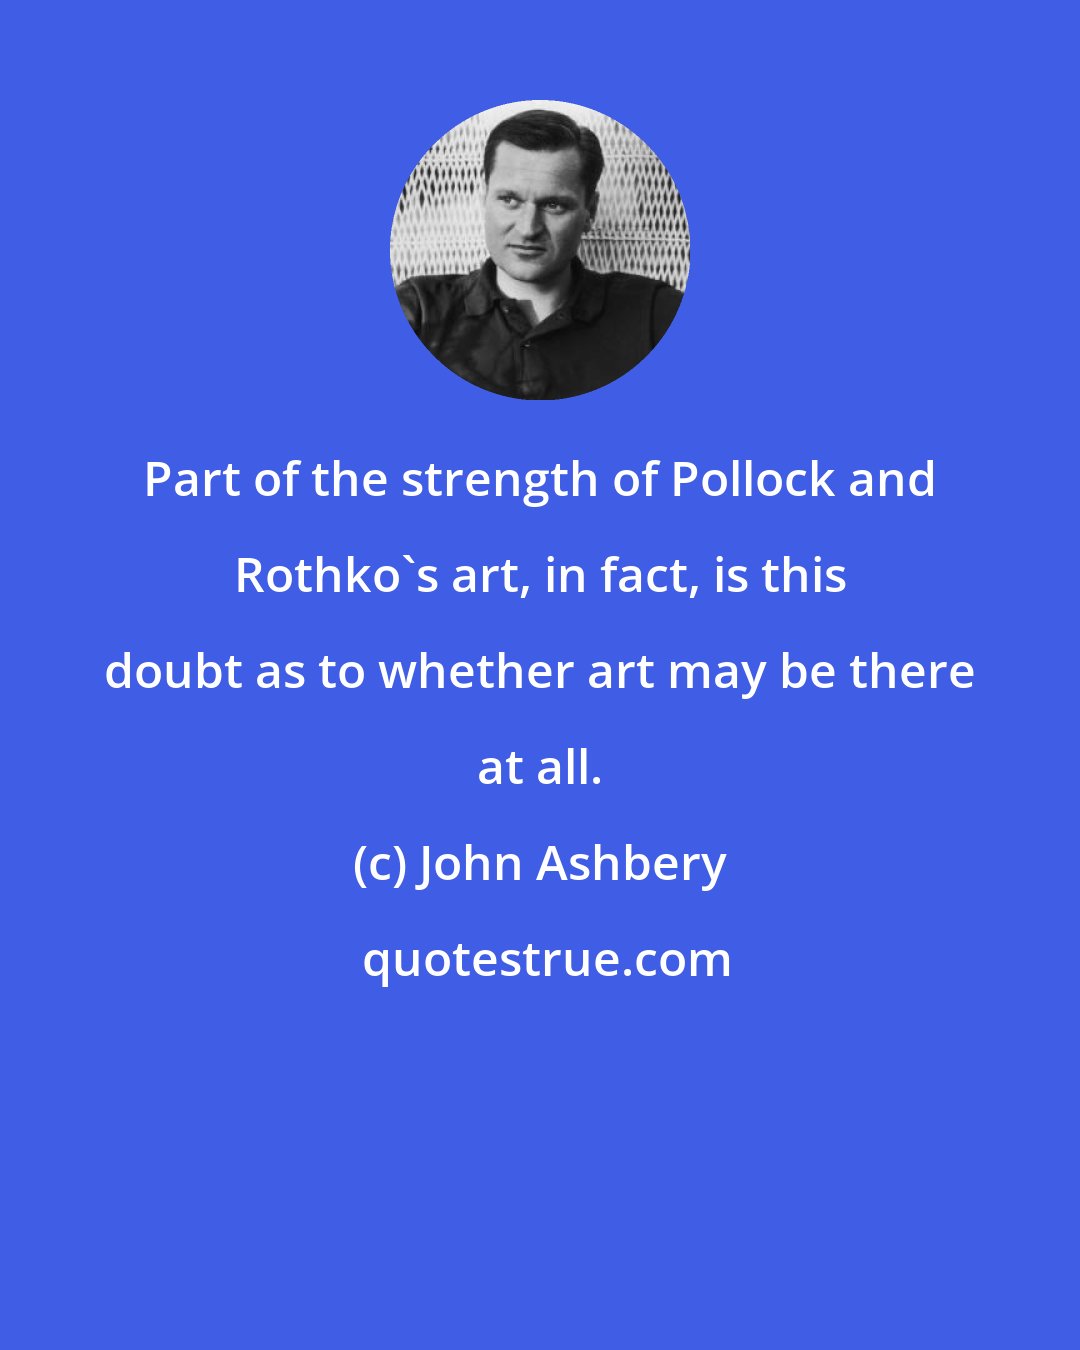 John Ashbery: Part of the strength of Pollock and Rothko's art, in fact, is this doubt as to whether art may be there at all.